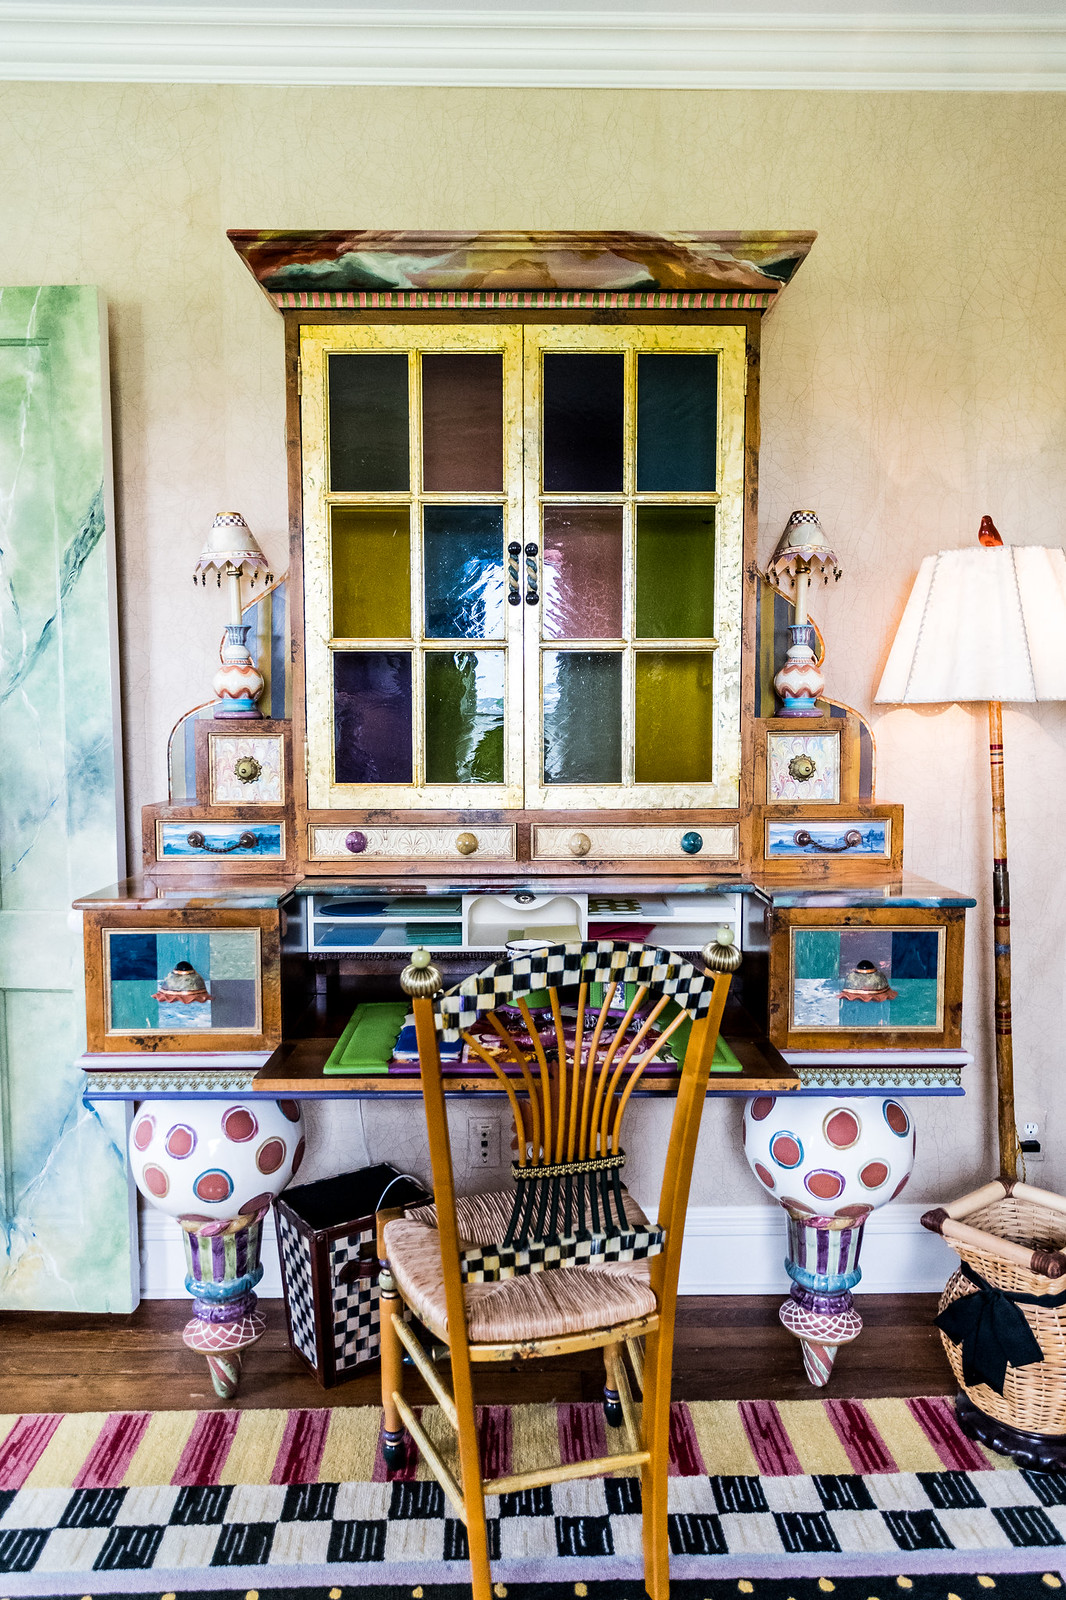 we could sit at this colorful desk all day long